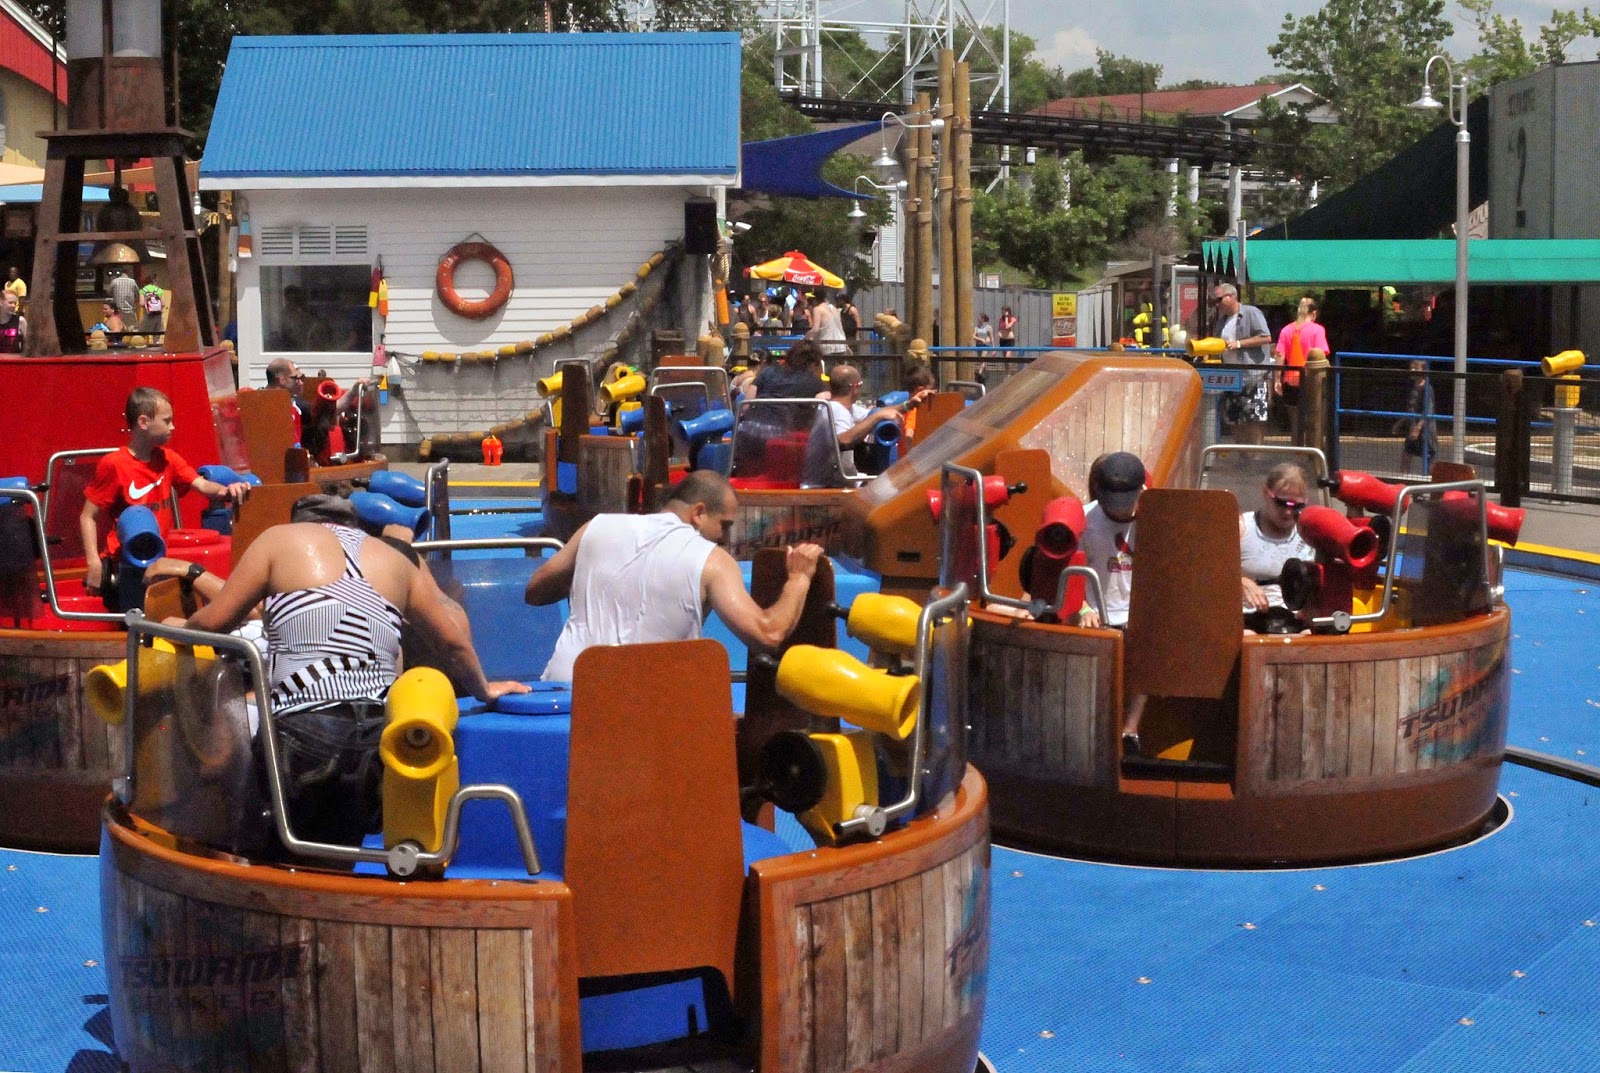 NewsPlusNotes: Ride the Tsunami Soaker at Six Flags St. Louis in 2014